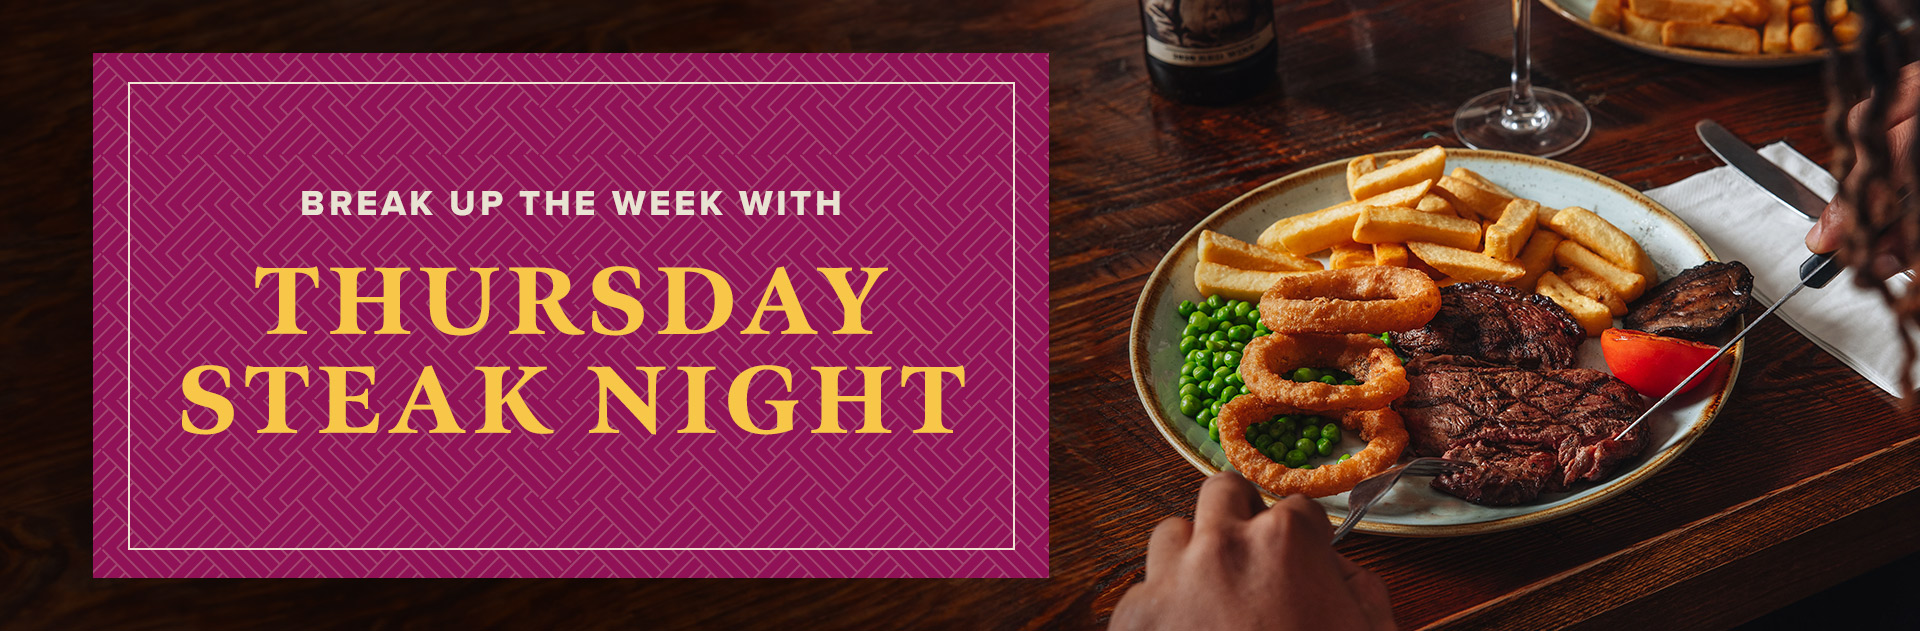 Thursday Steak Night at The Crown